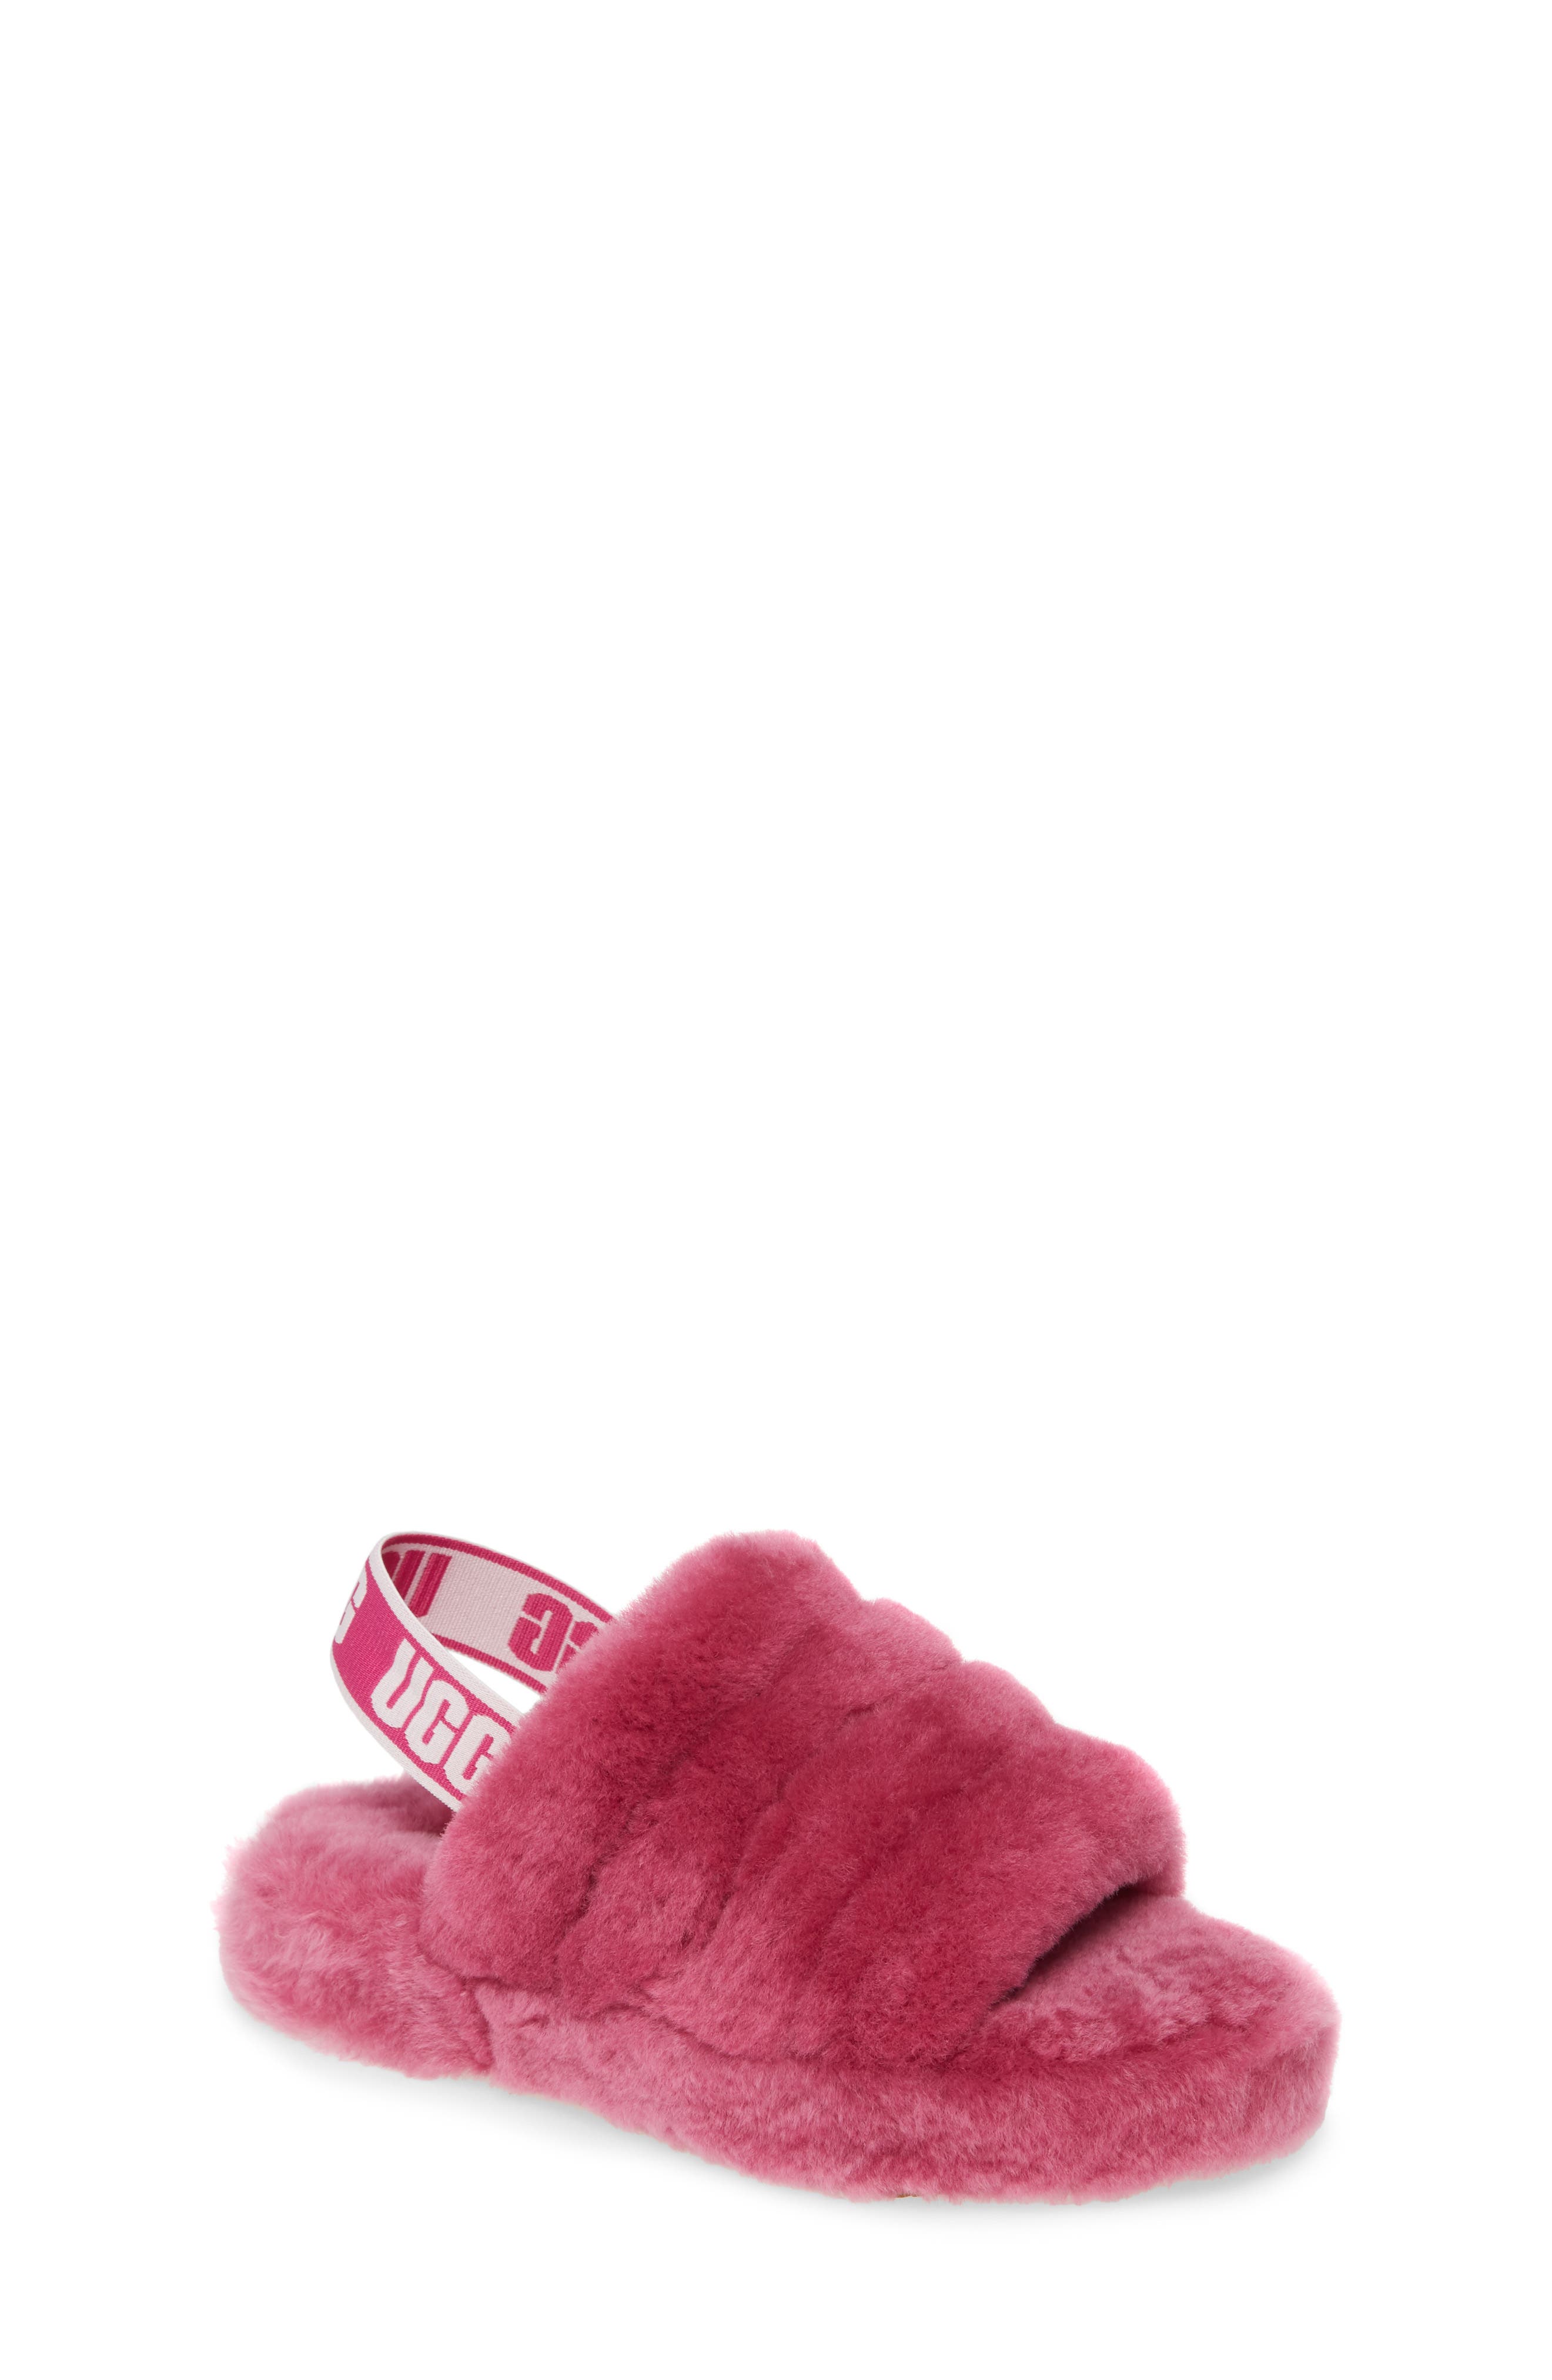 childrens pink ugg slippers